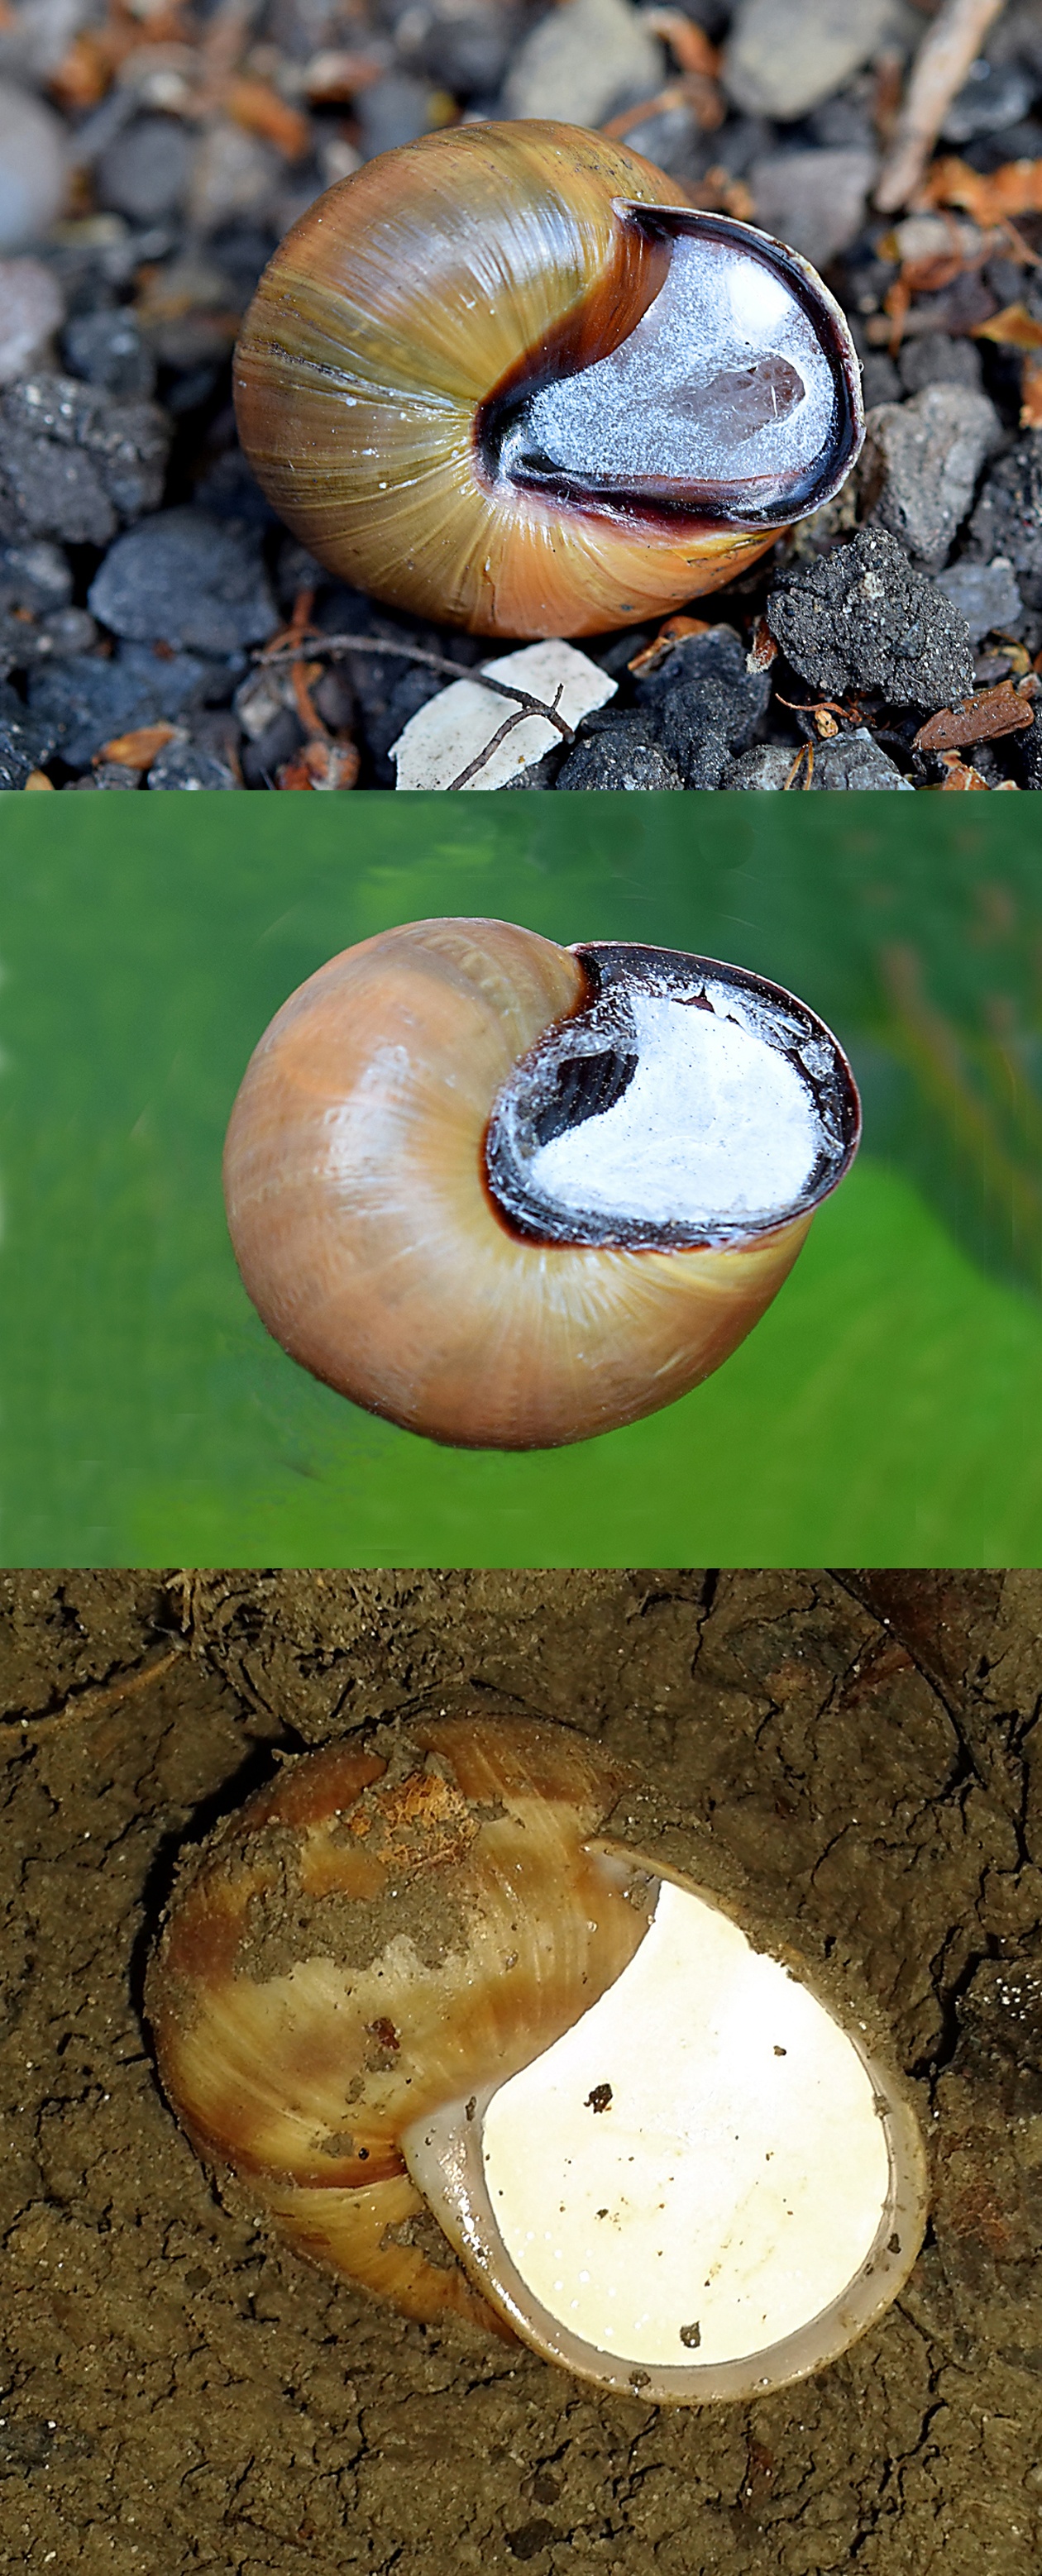 What happens if snails get too cold?